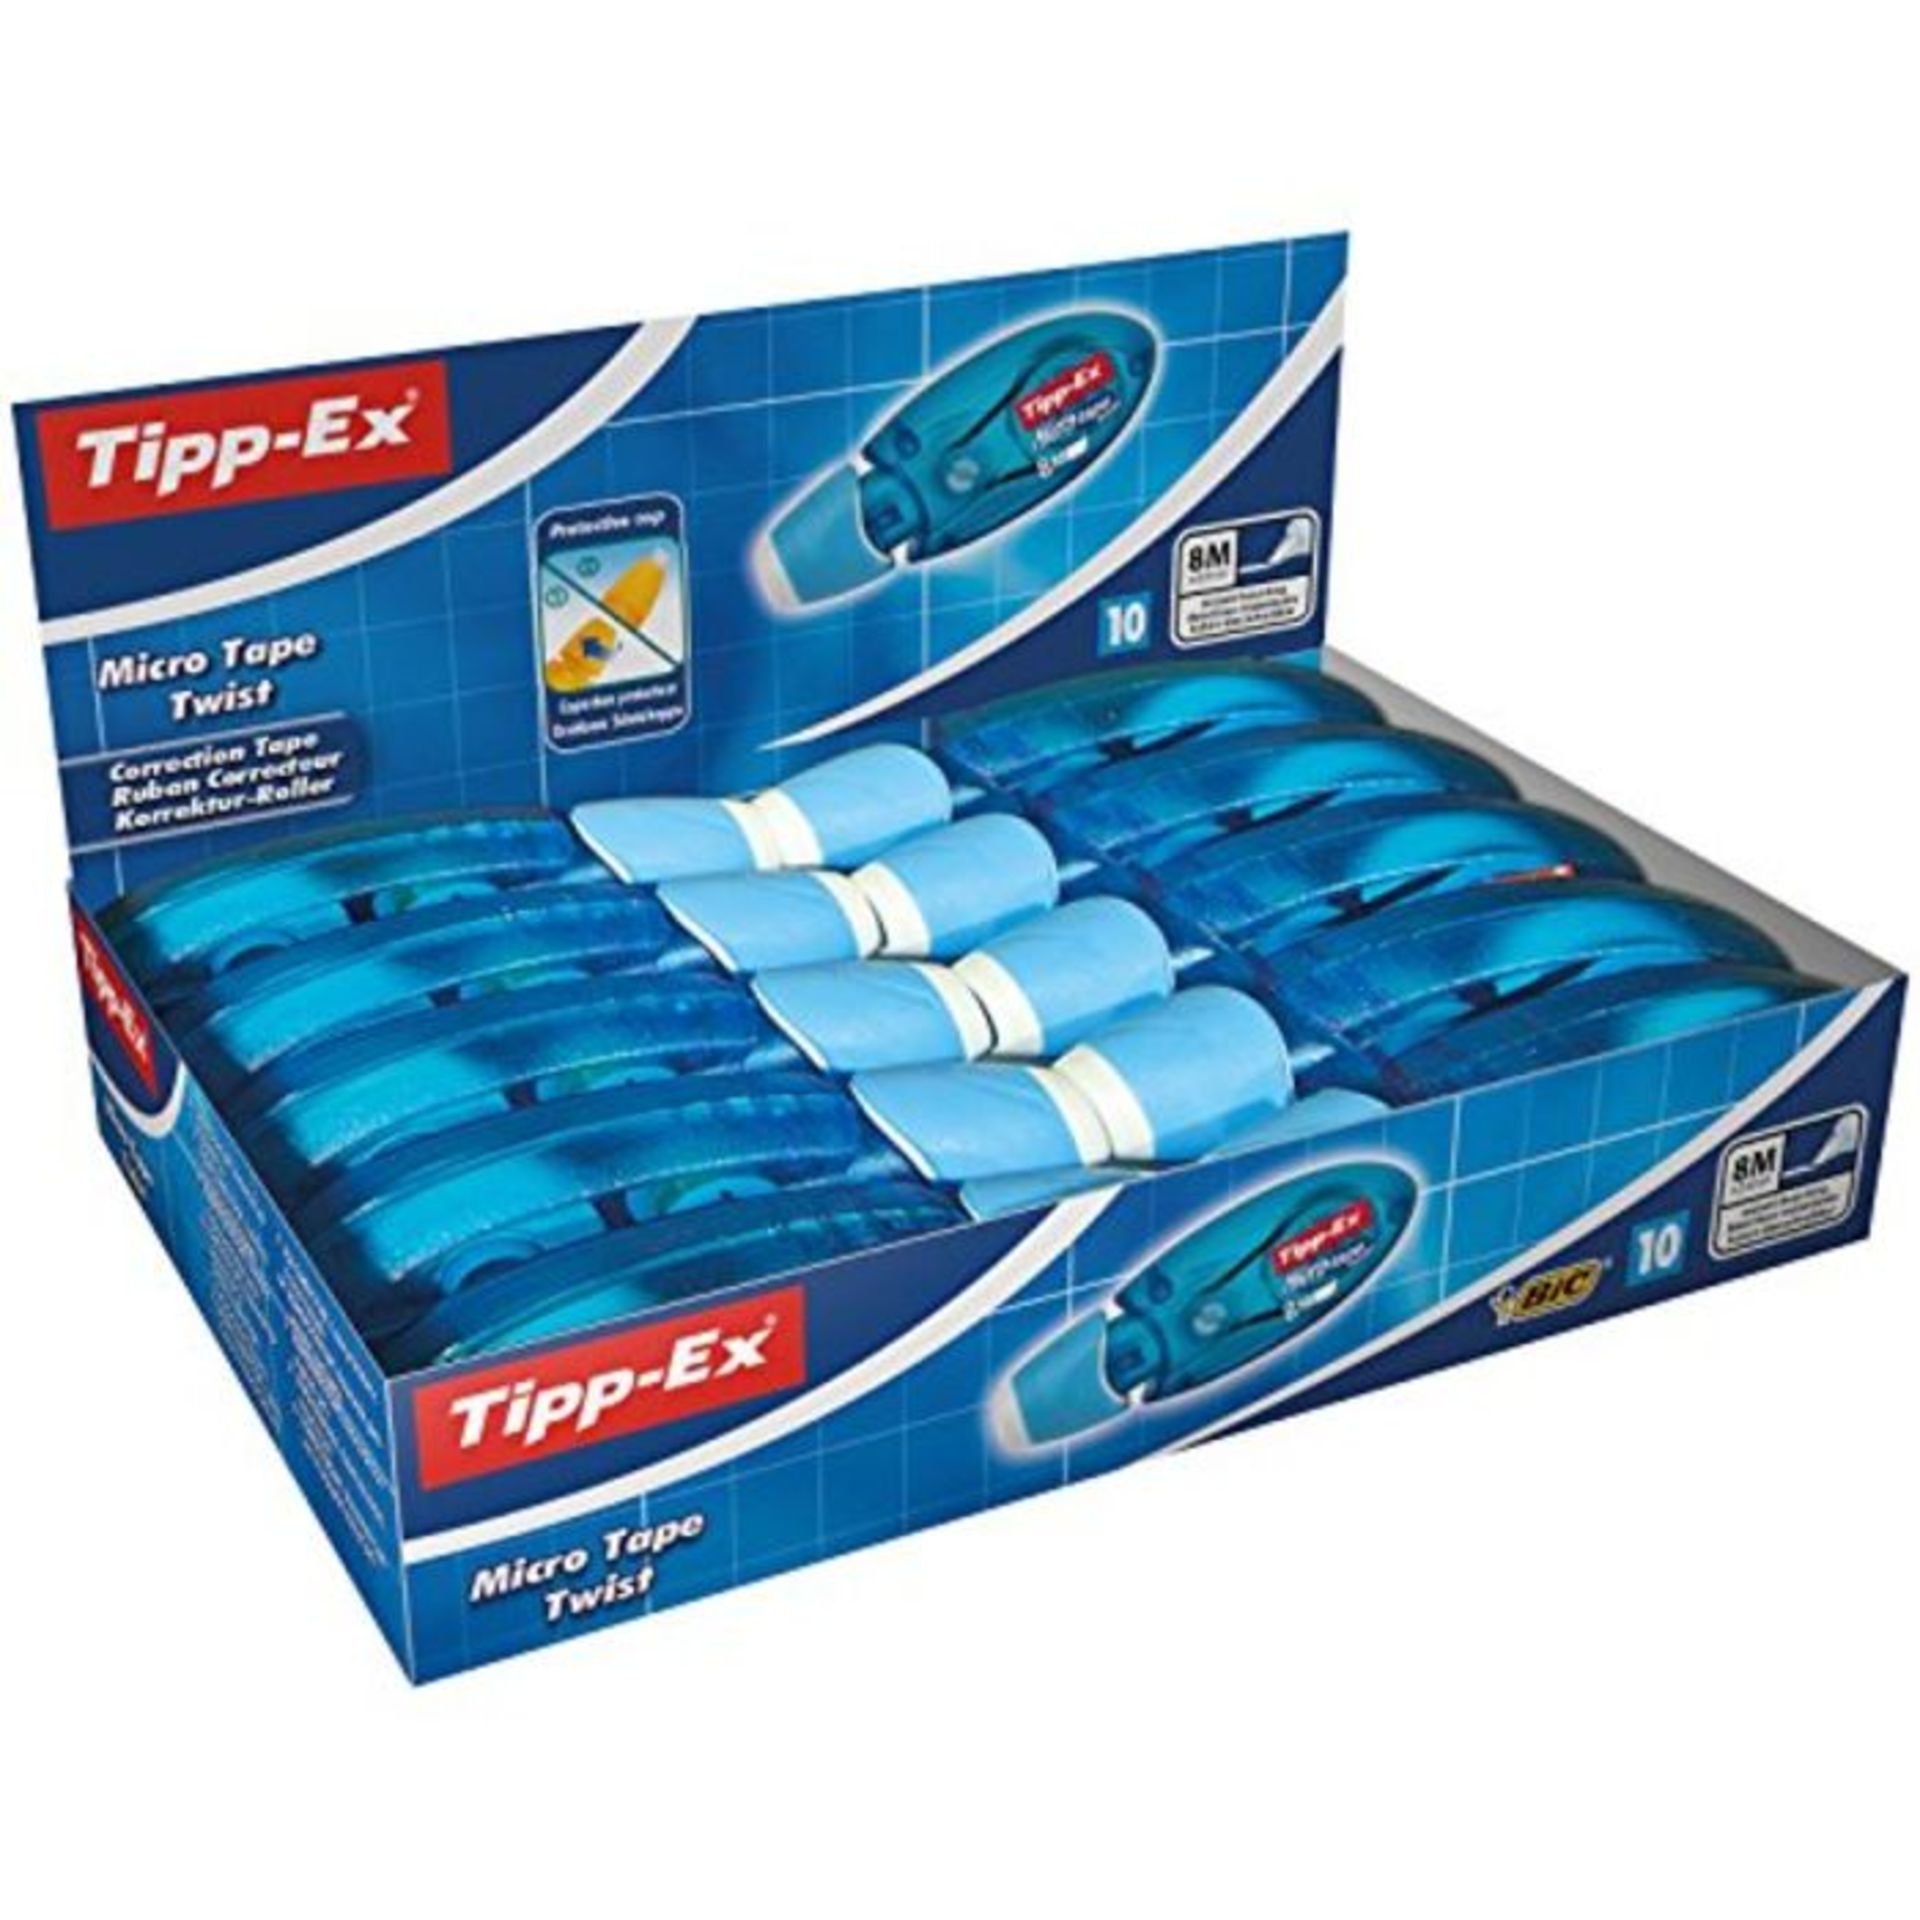 Tipp-Ex Micro Tape Twist Correction Tapes - Blue Body, Box of 10